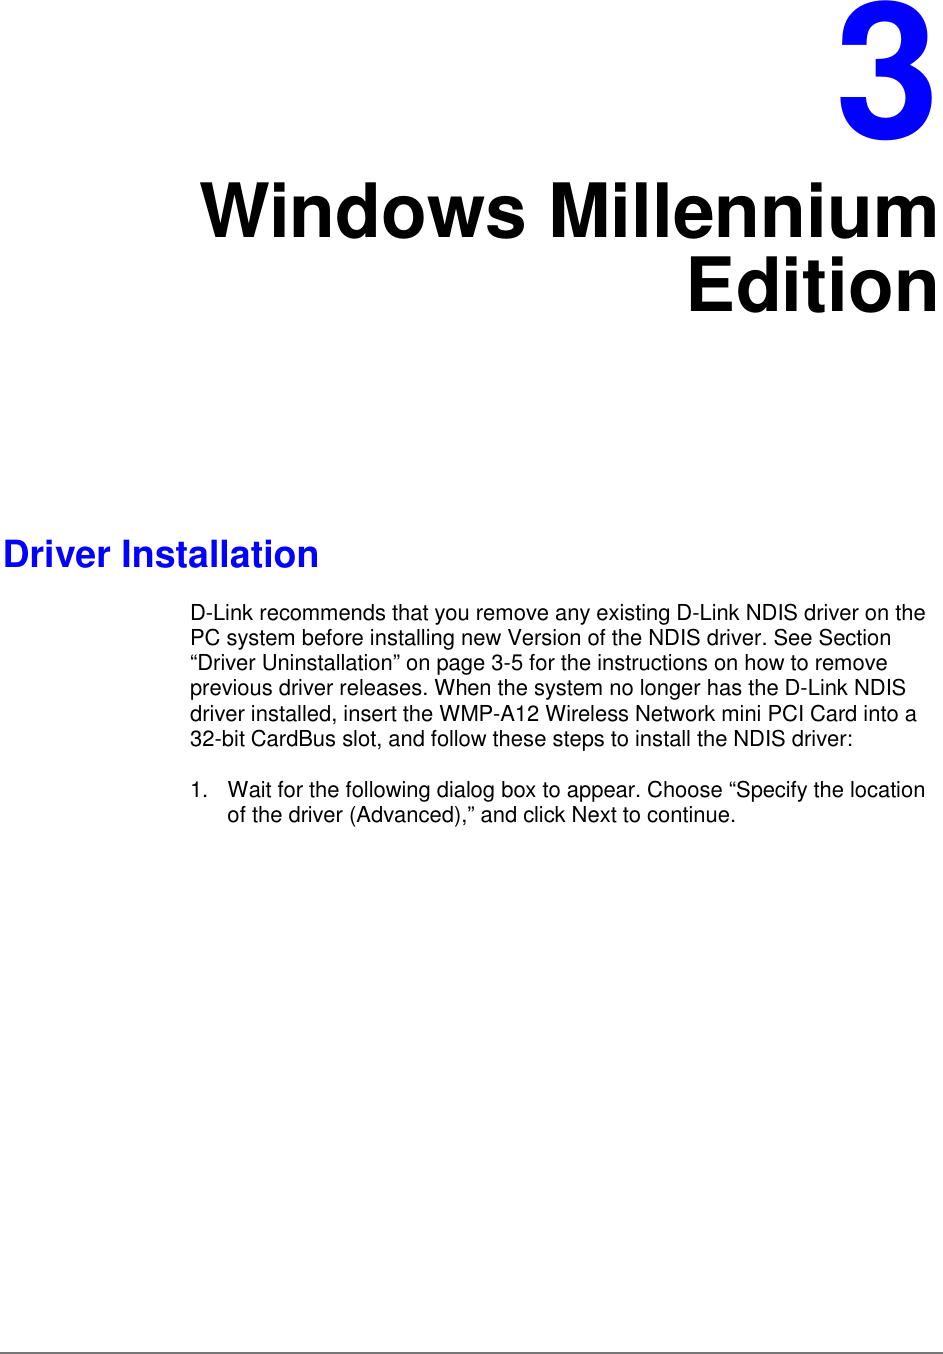 3Windows MillenniumEditionDriver InstallationD-Link recommends that you remove any existing D-Link NDIS driver on thePC system before installing new Version of the NDIS driver. See Section“Driver Uninstallation” on page 3-5 for the instructions on how to removeprevious driver releases. When the system no longer has the D-Link NDISdriver installed, insert the WMP-A12 Wireless Network mini PCI Card into a32-bit CardBus slot, and follow these steps to install the NDIS driver:1.  Wait for the following dialog box to appear. Choose “Specify the locationof the driver (Advanced),” and click Next to continue.